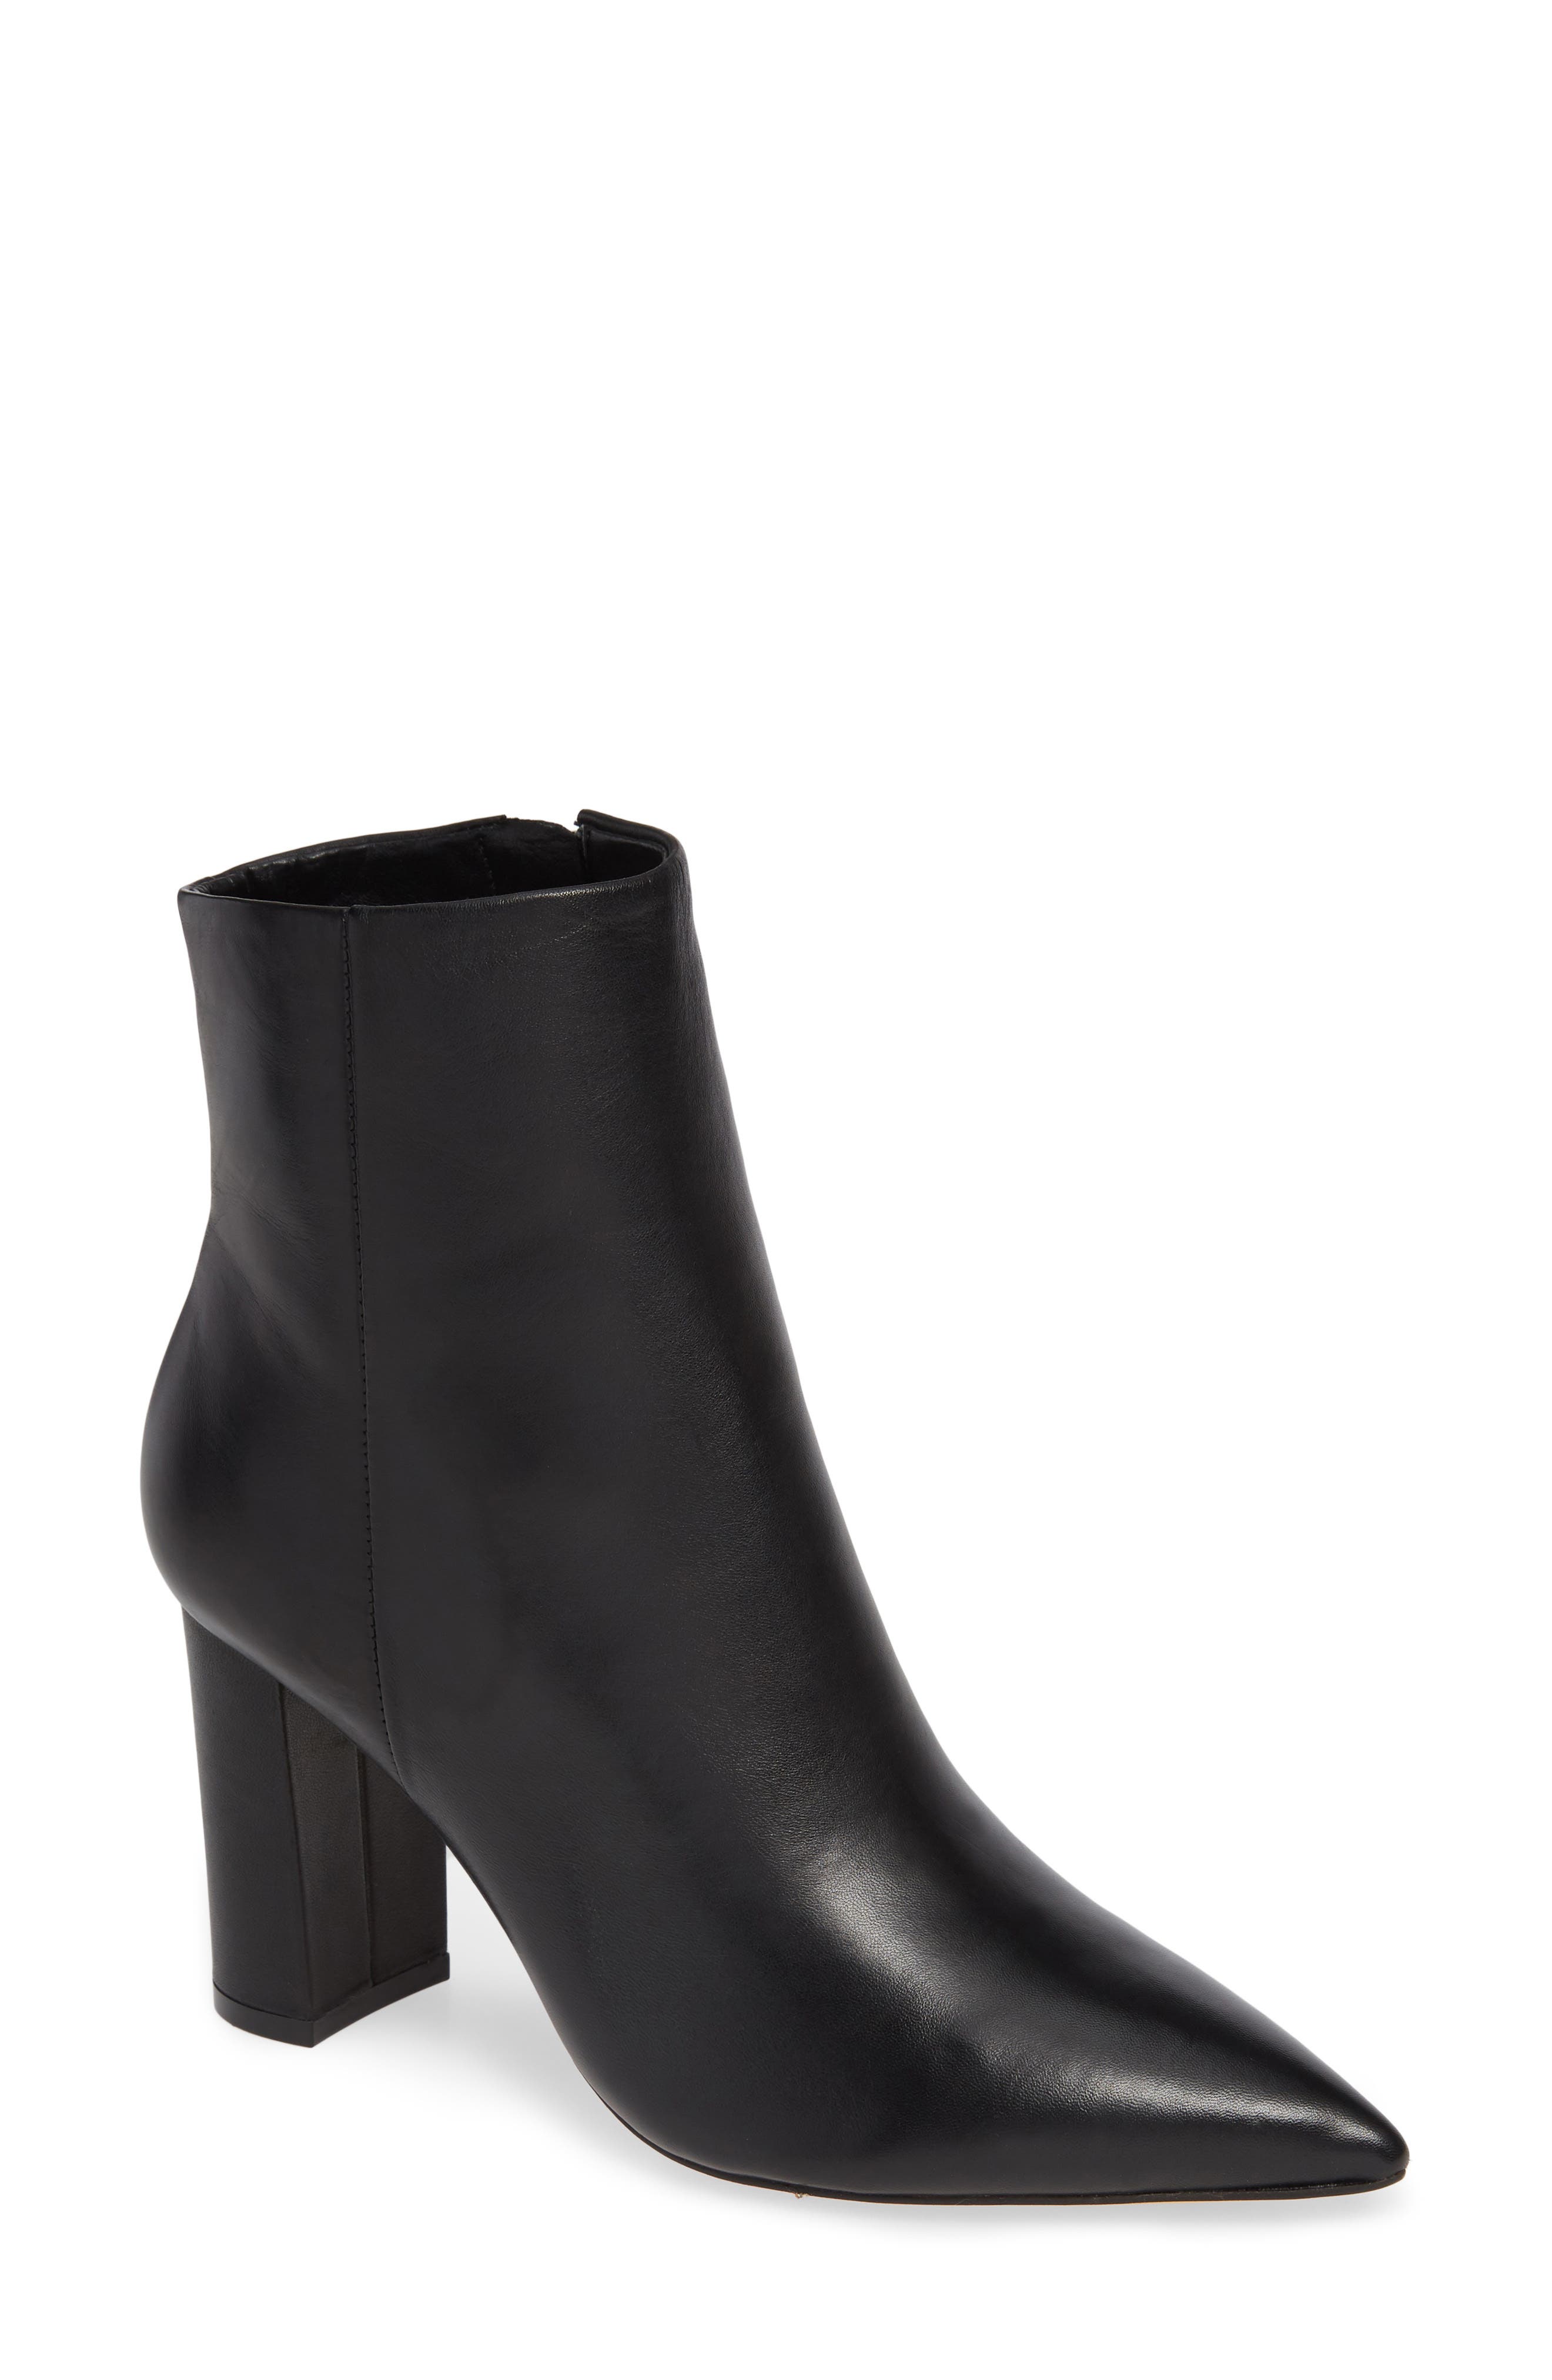 mark fisher black boots